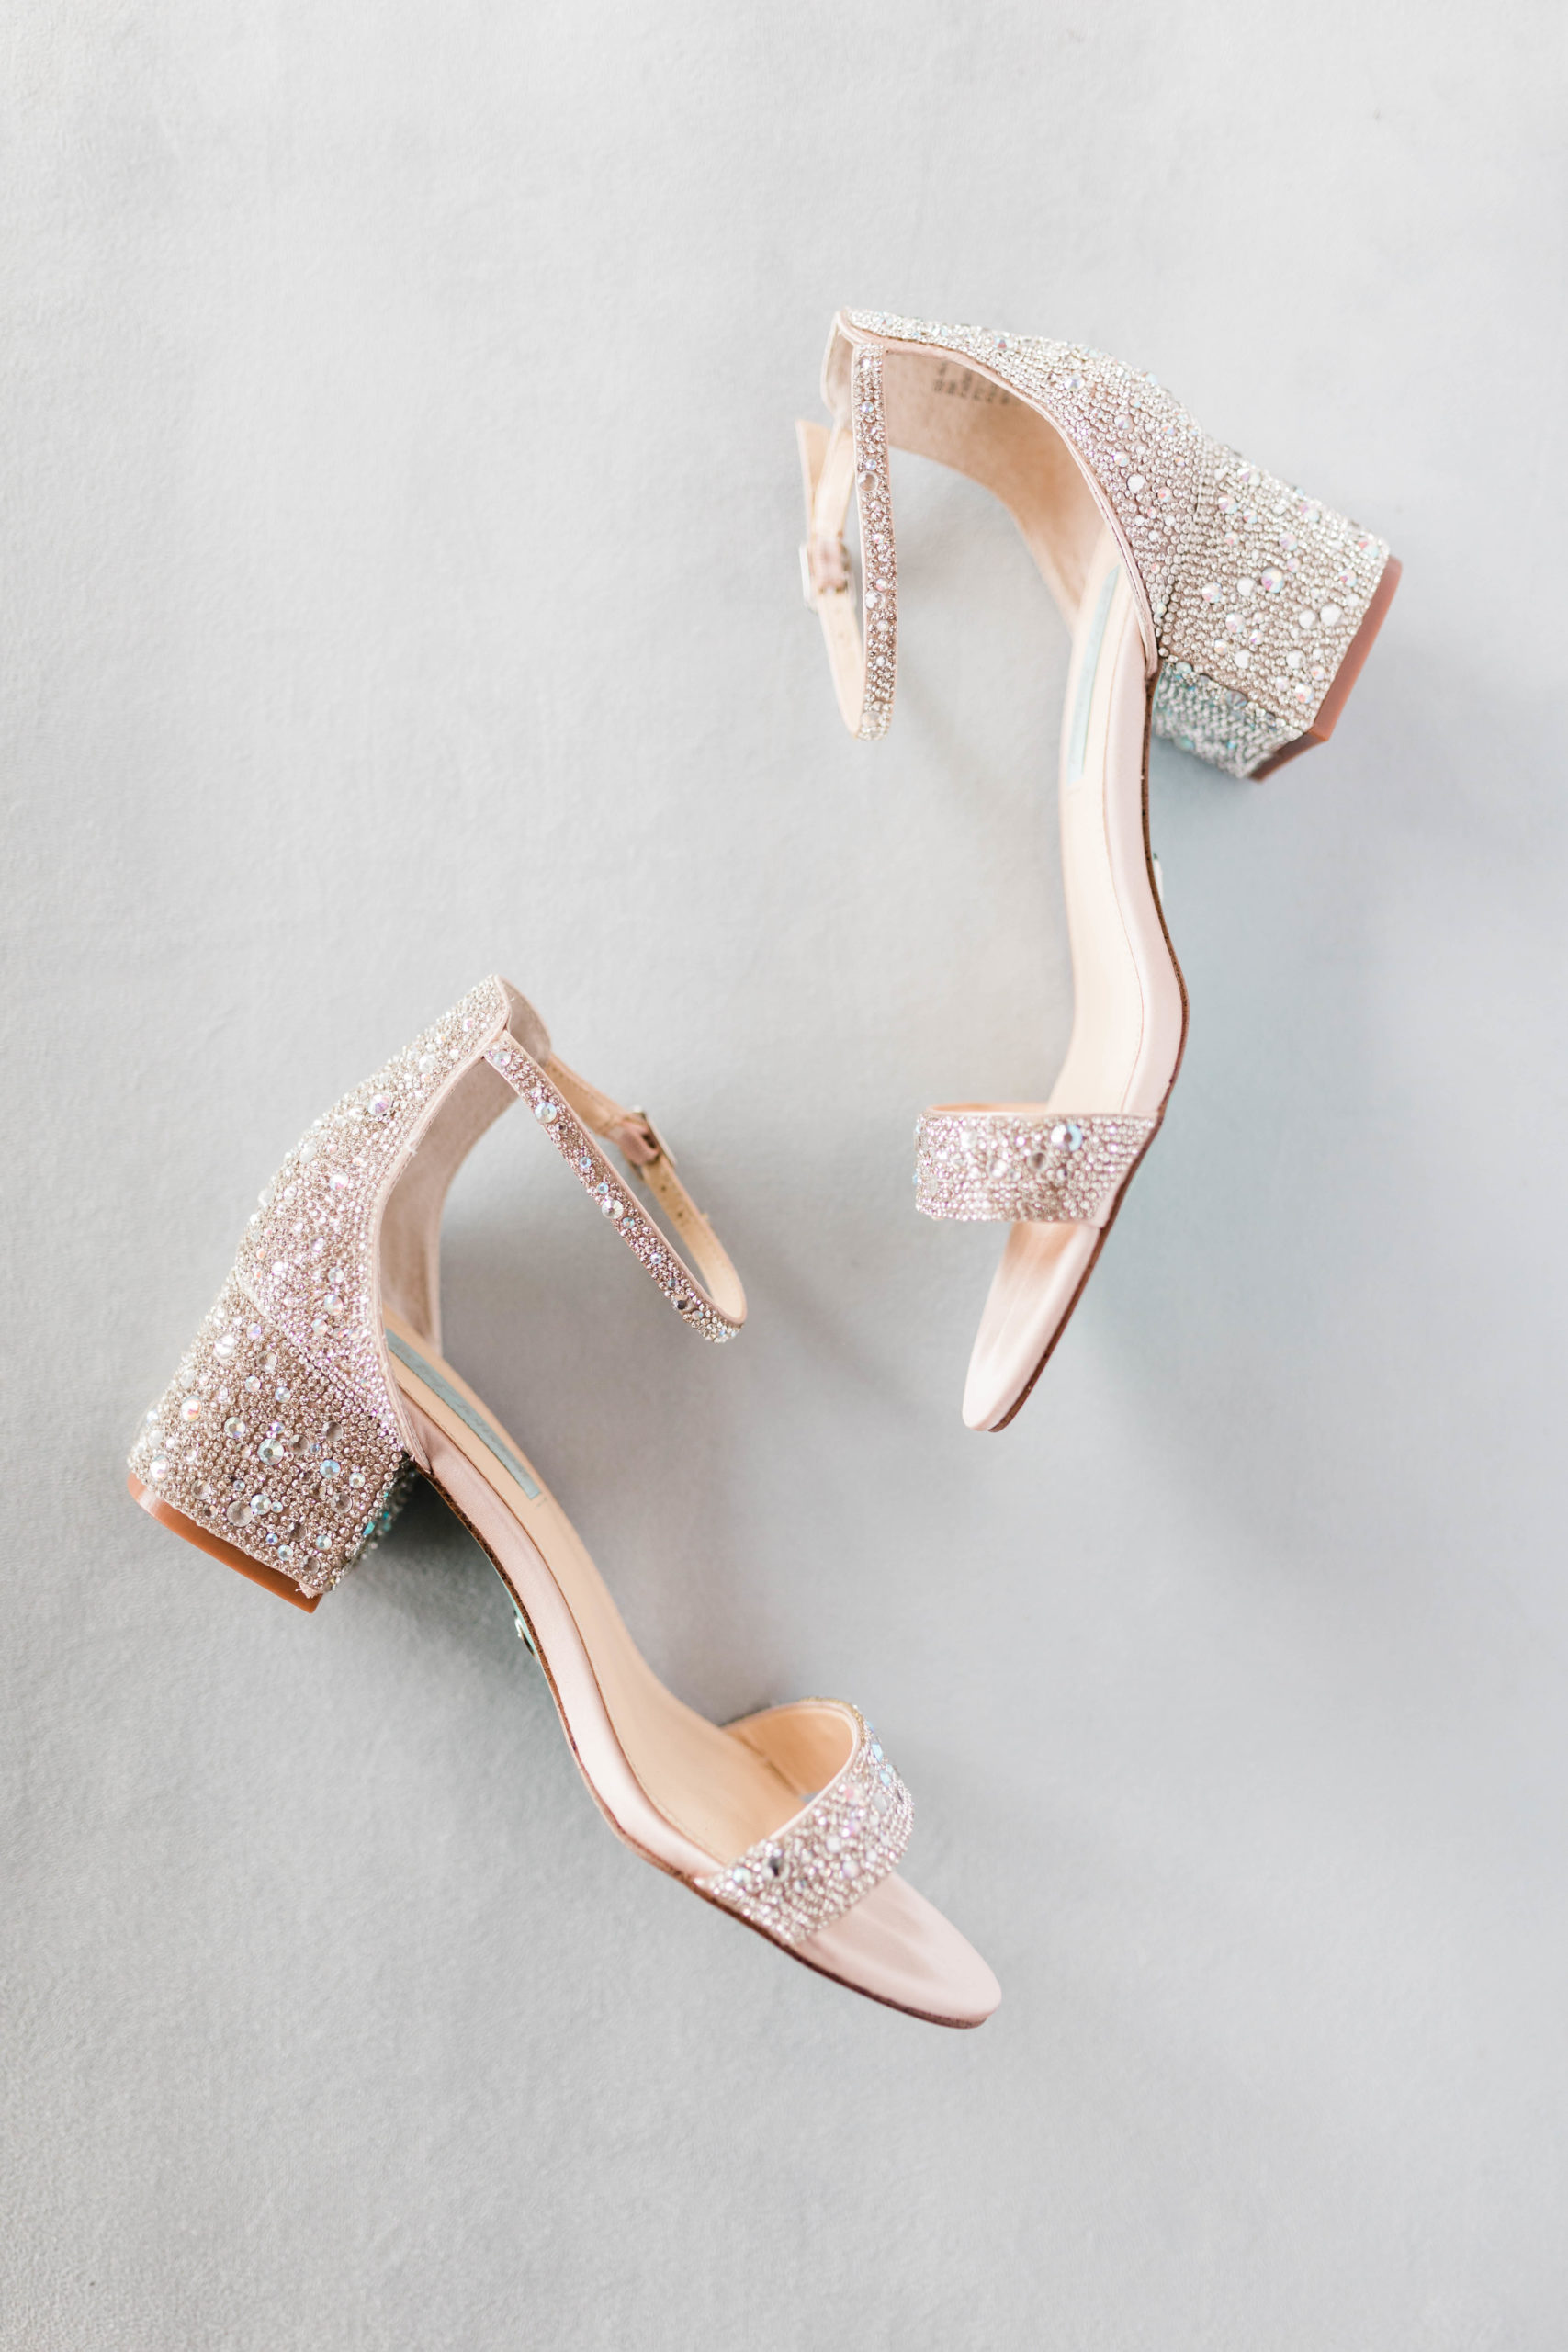 bridal shoes with a low heel and sequence details 